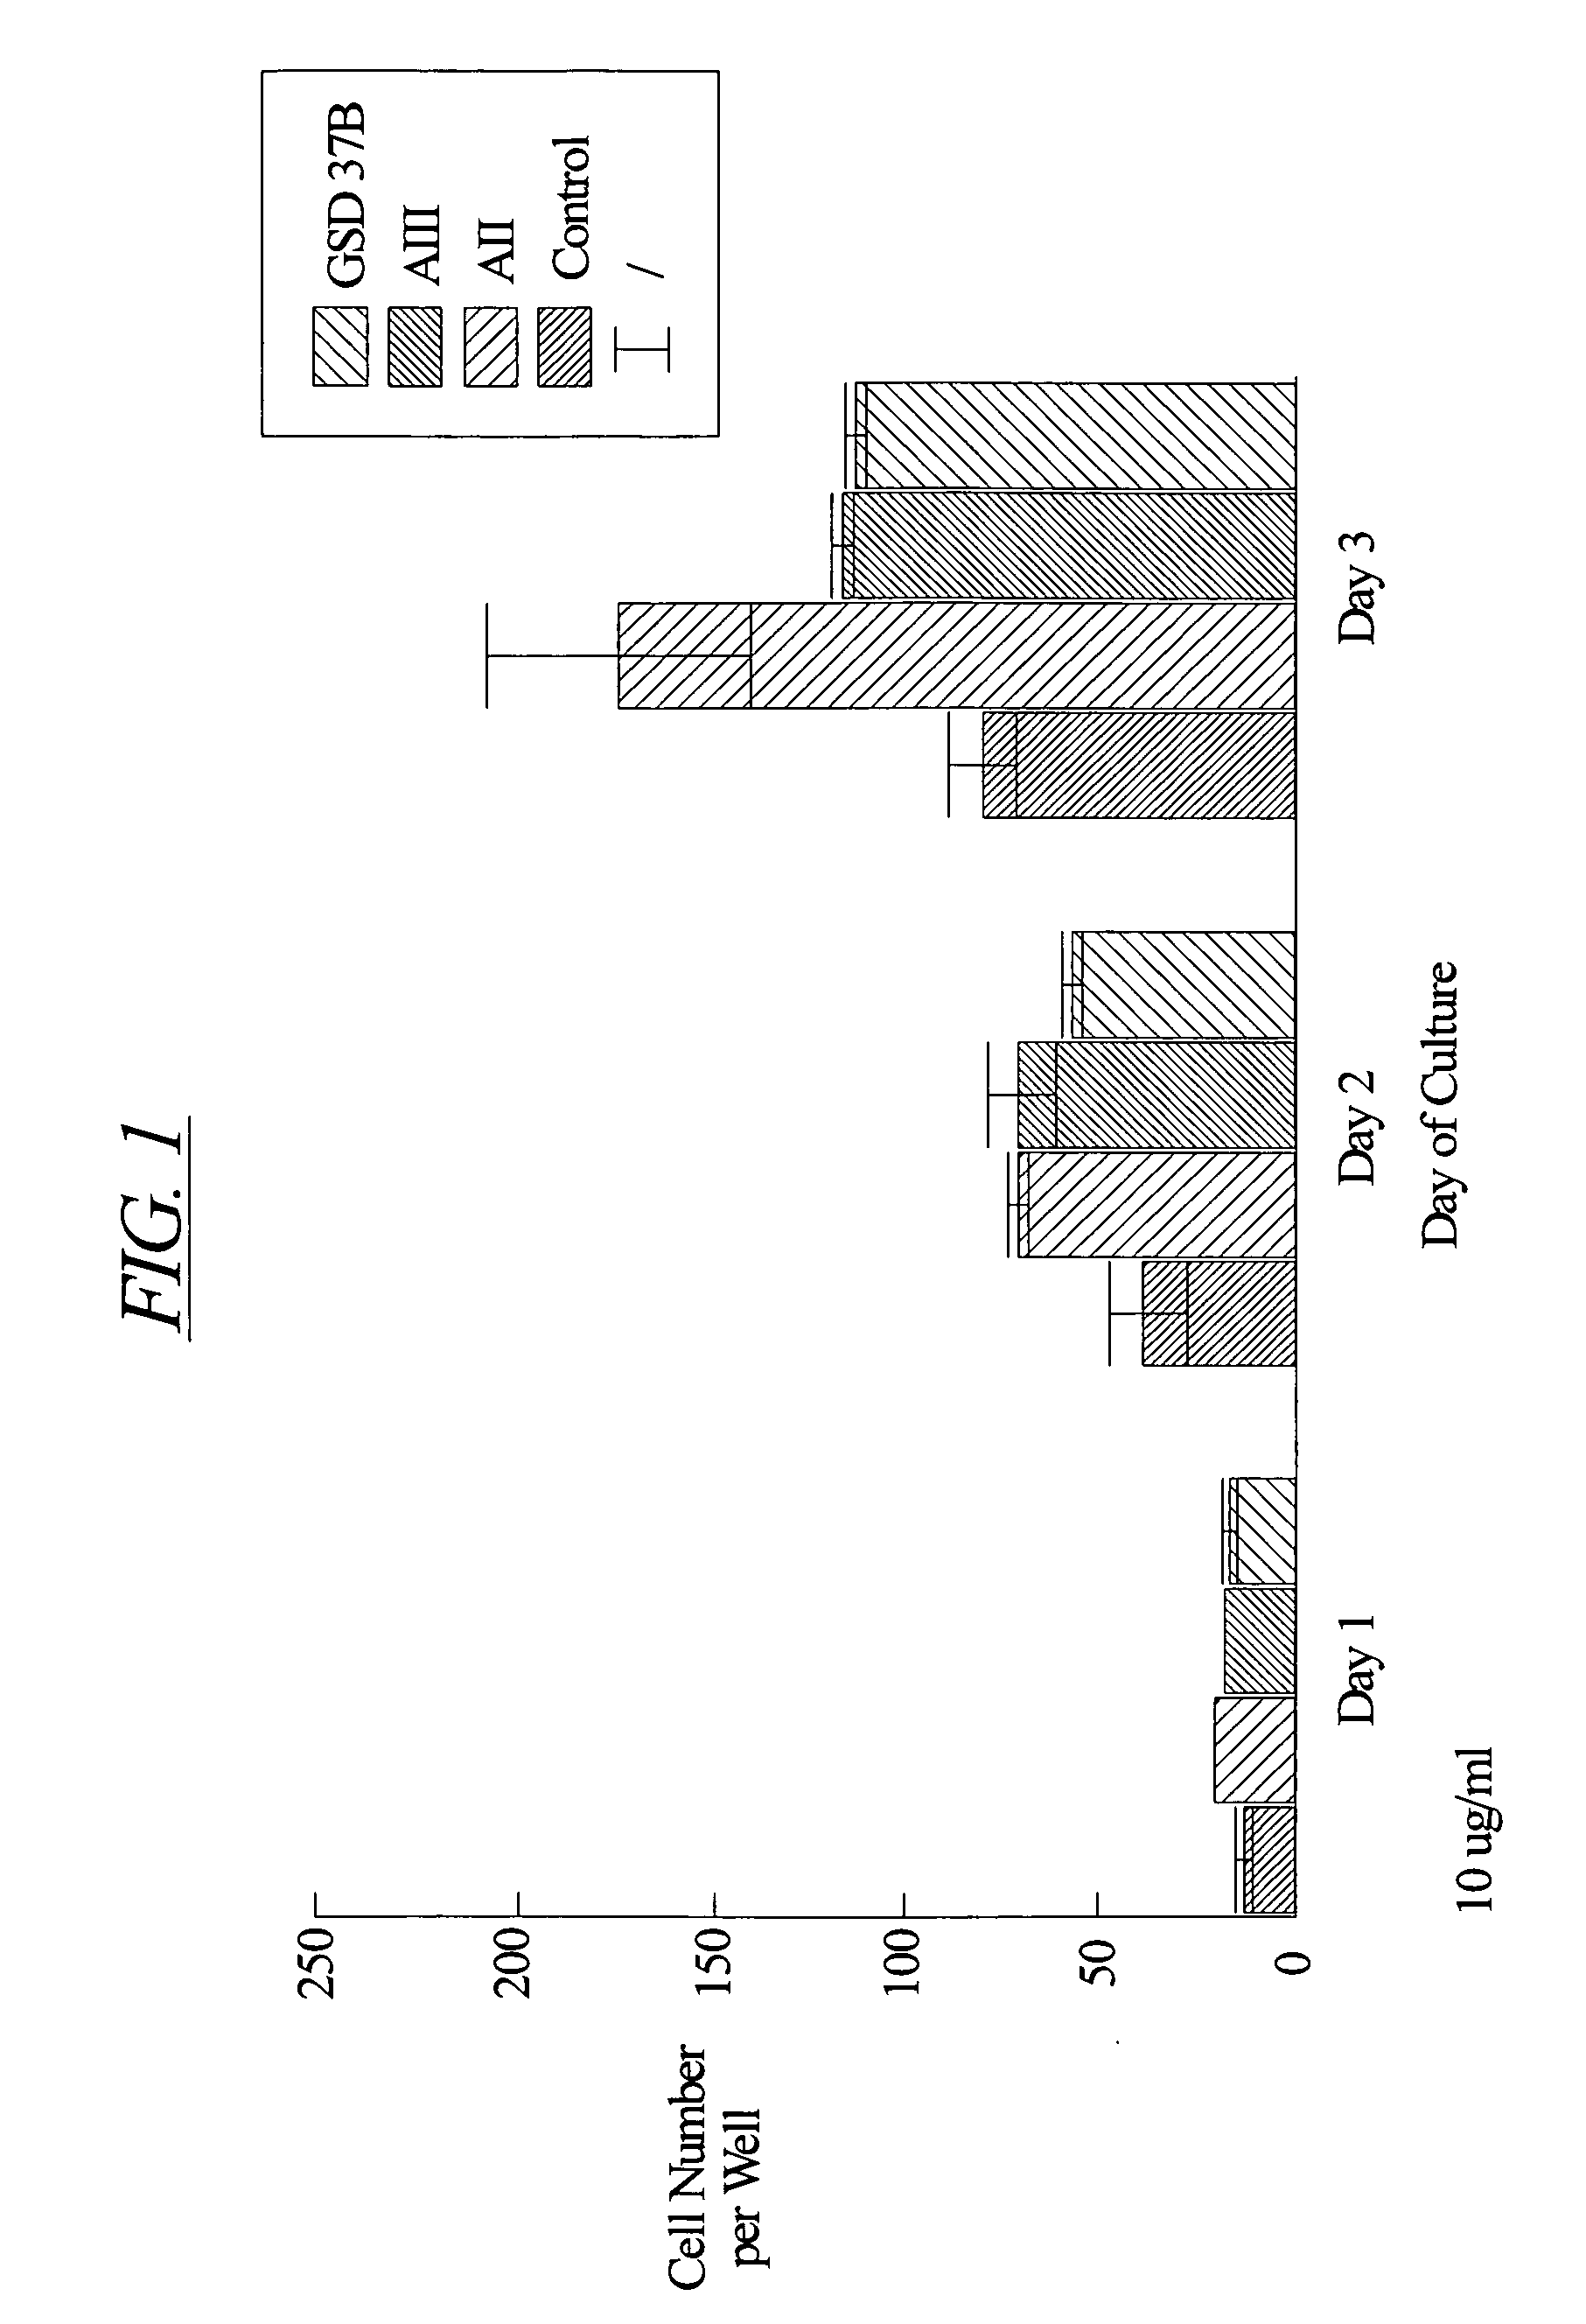 Methods for accelerating bone, cartilage, and connective tissue growth